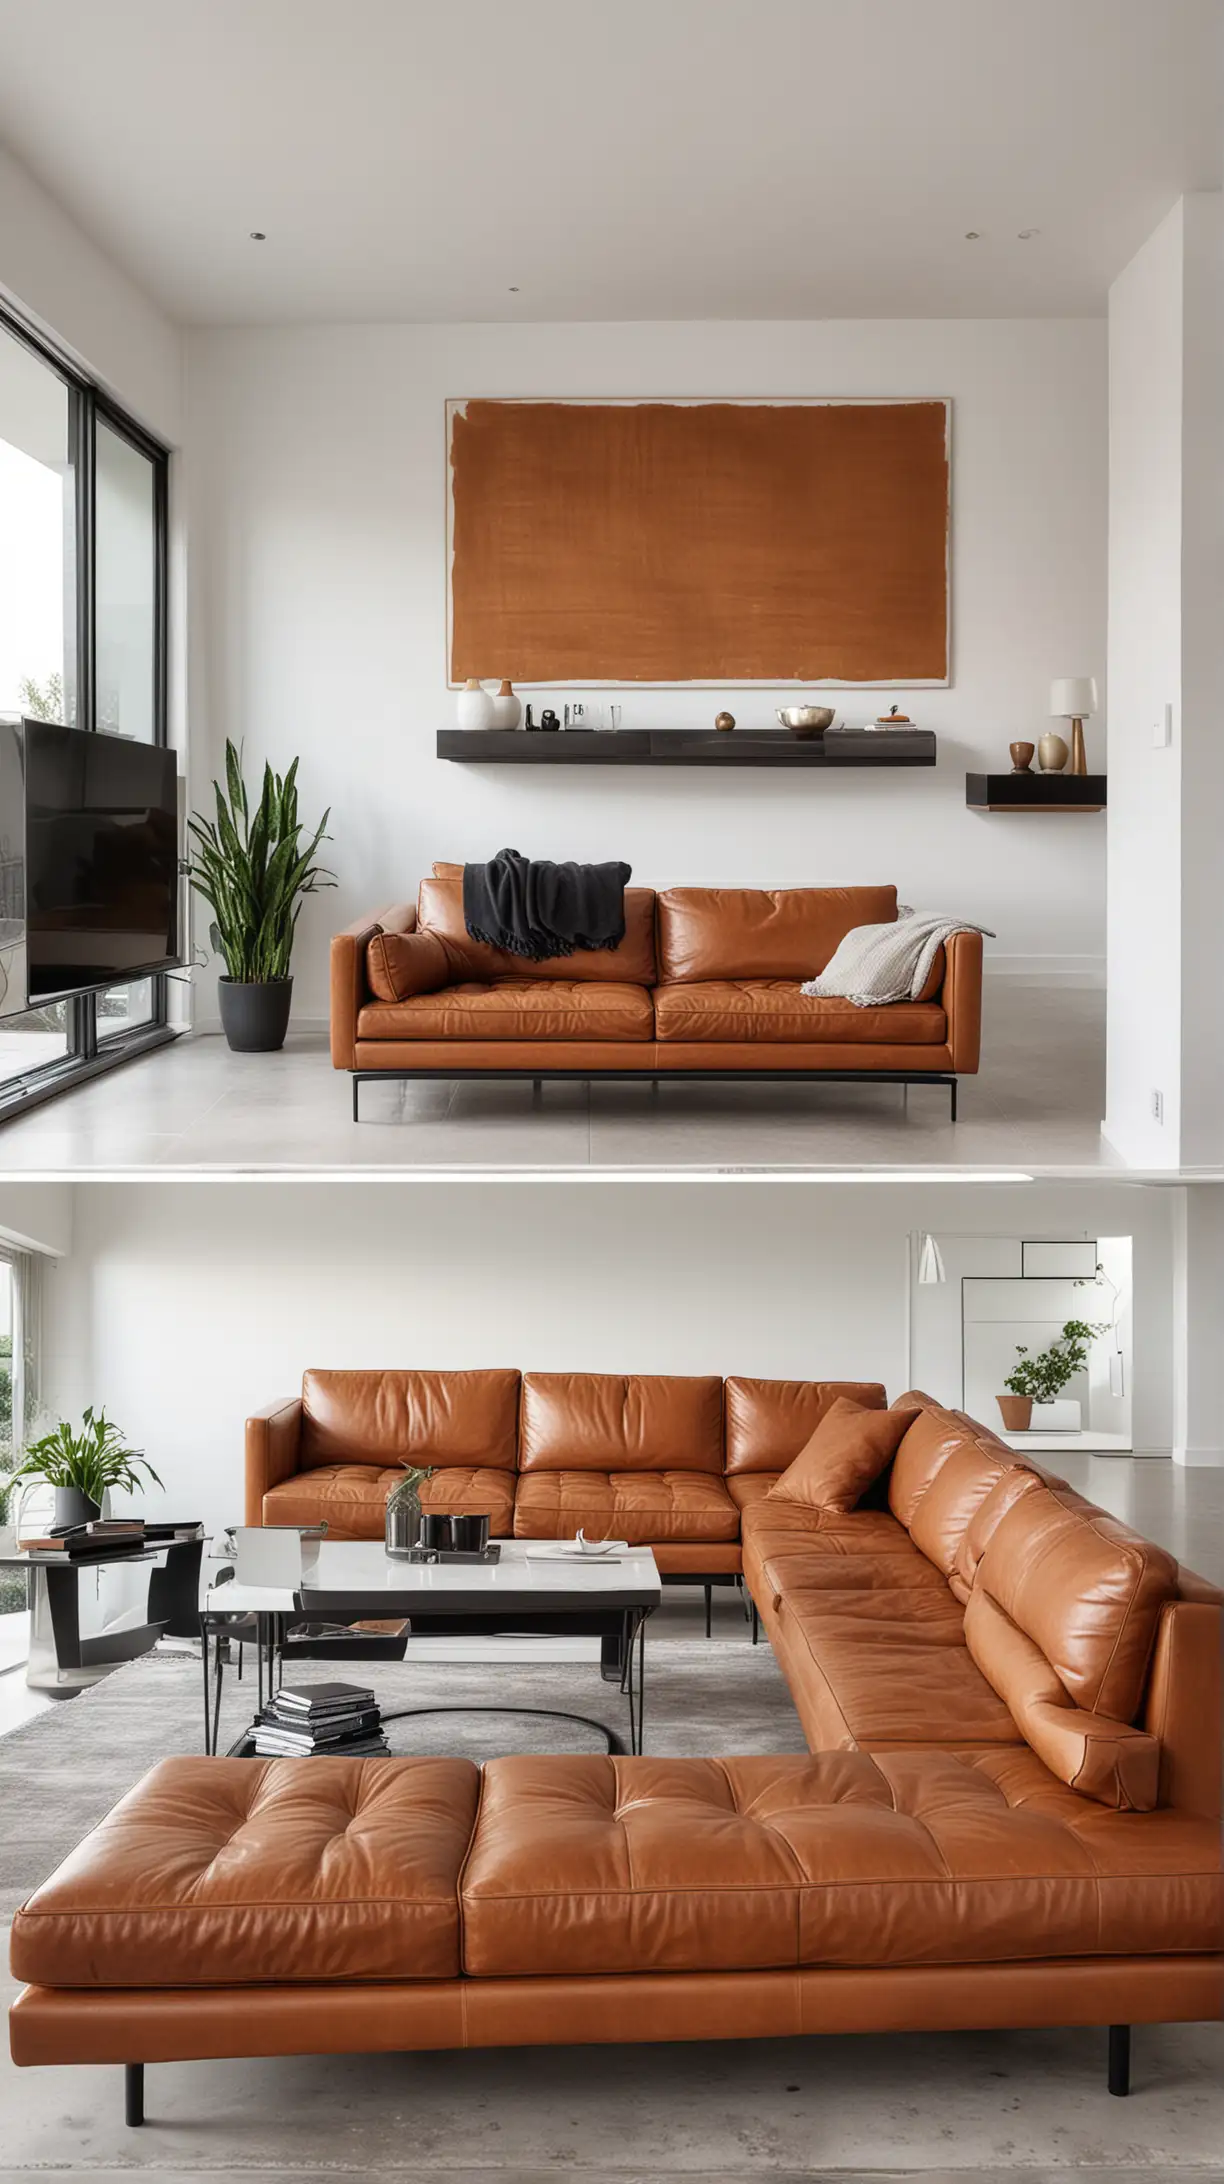 A modern minimalist living room featuring a cognac leather couch, white walls, sleek black furniture, metallic accents, and minimal decor. The room should look clean and airy, emphasizing open space and contemporary design.